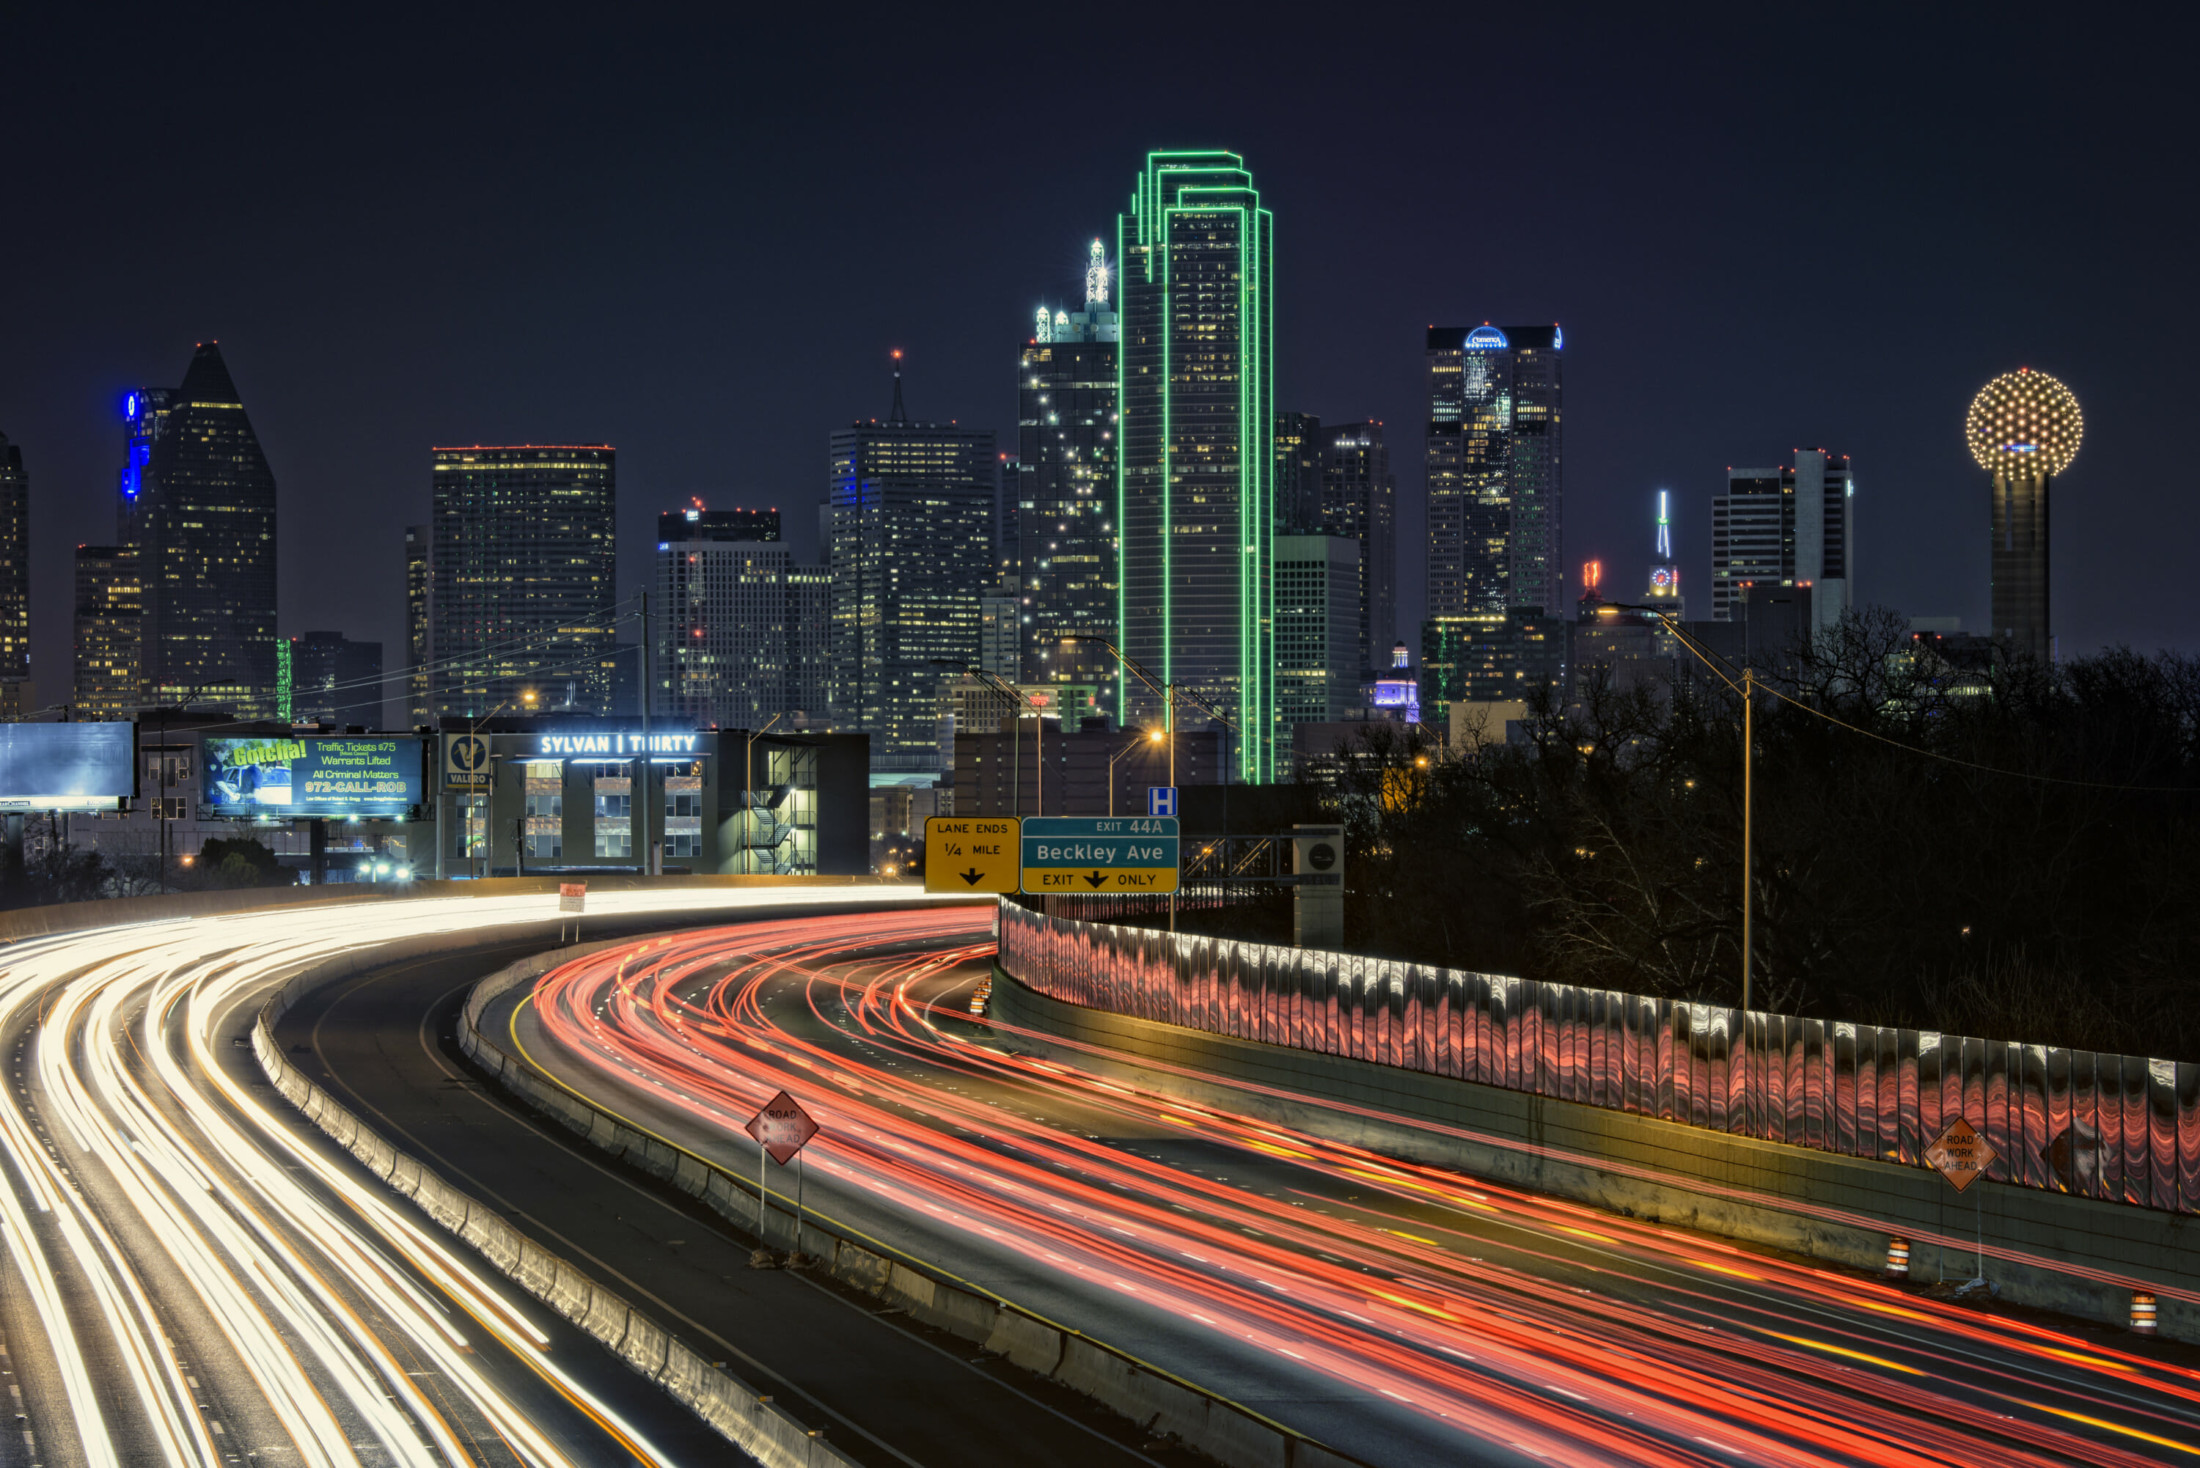 Dallas, Texas | 50 Up-and-Coming Real Estate Markets to Watch in 2019 | Buildium